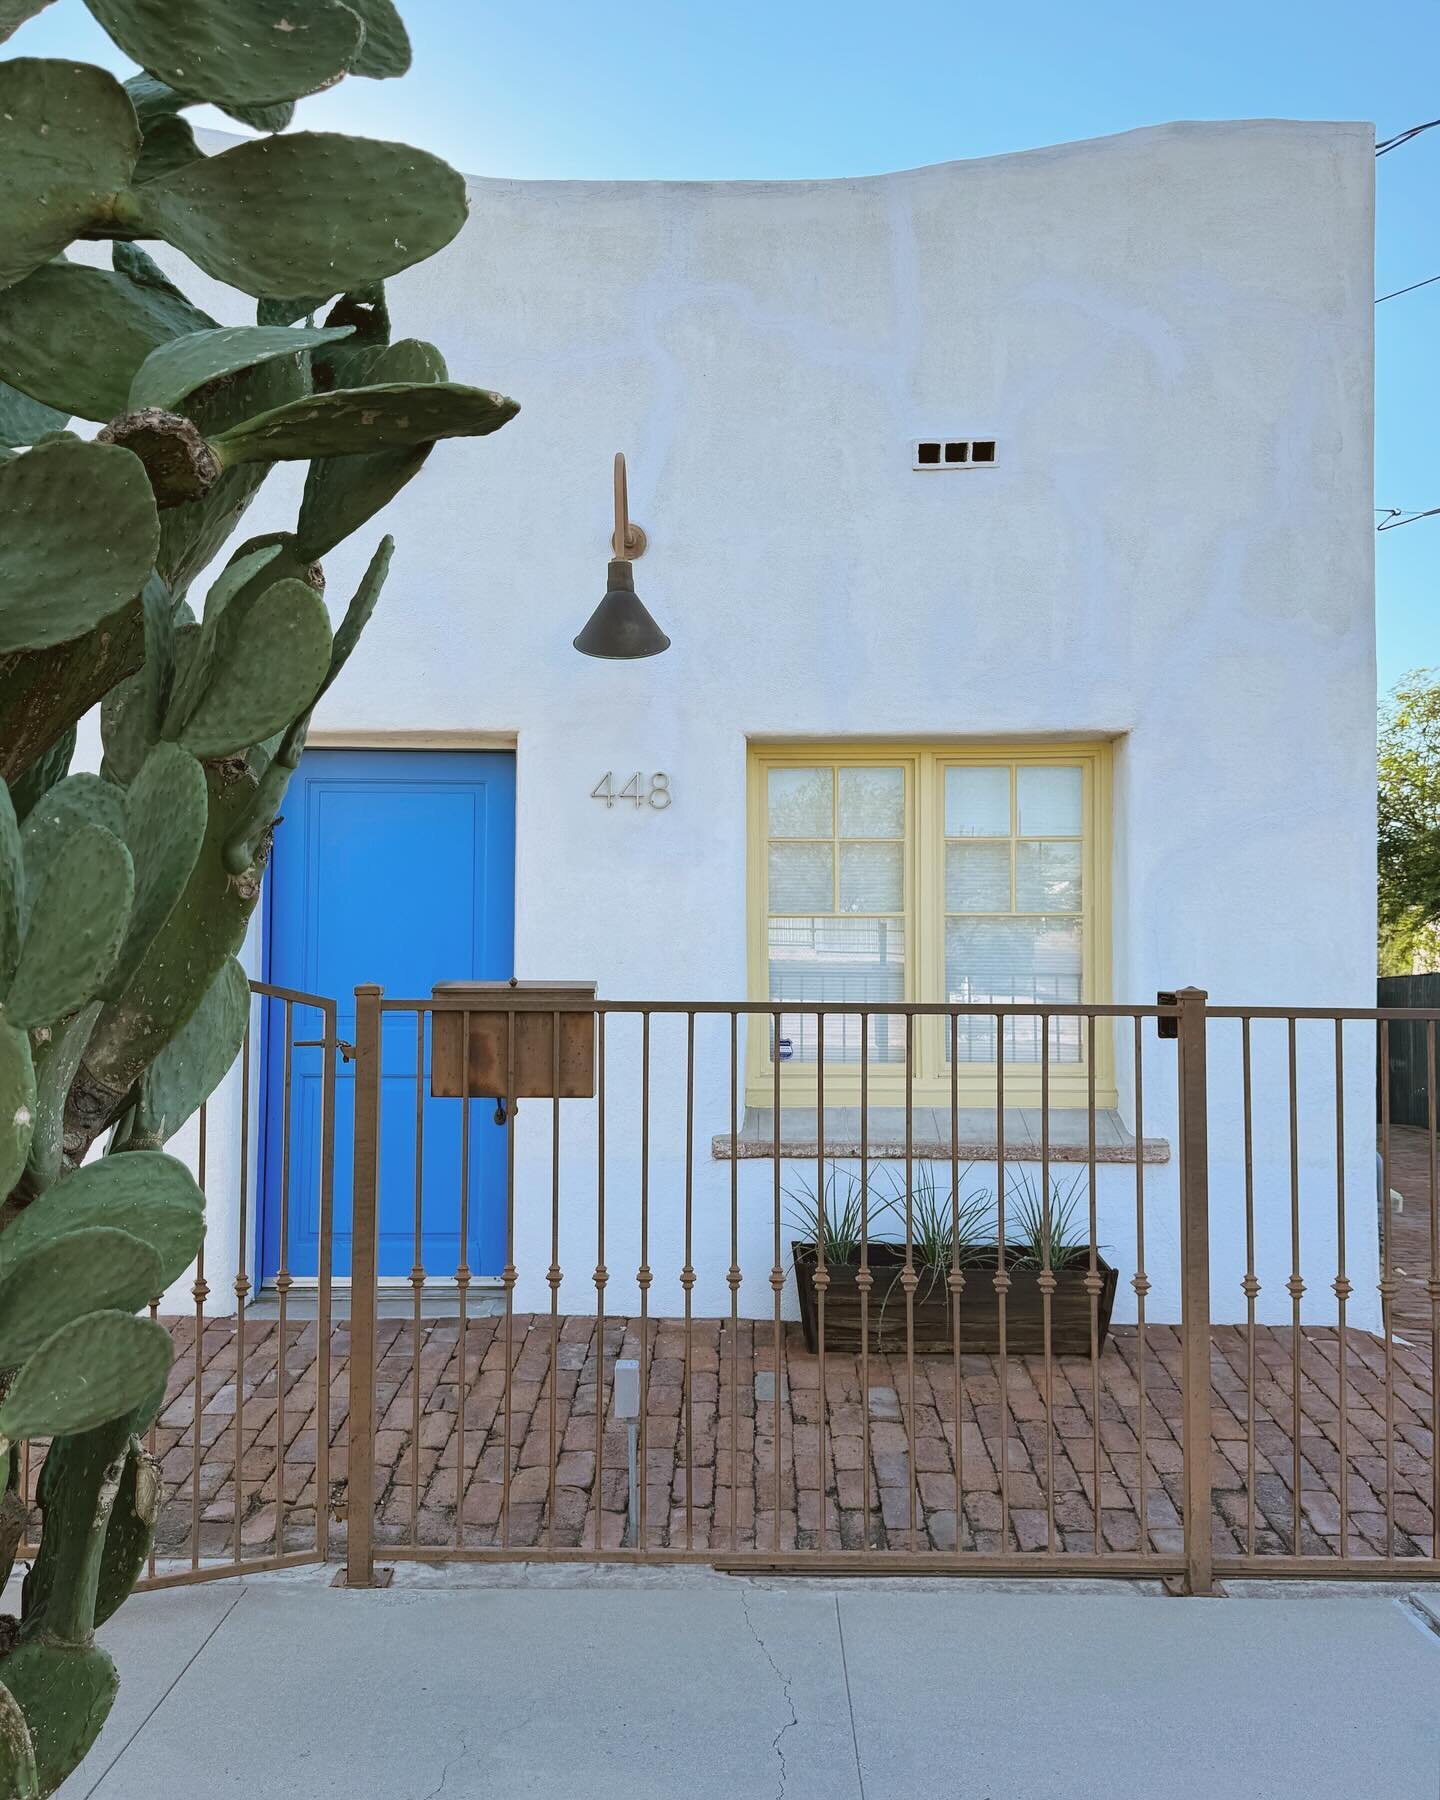 Beautiful Barrio Viejo home just went live today and we want you to live in it.

1930s large 2 bedroom / 2 bath adobe that oozes charm and move in ready.

Located next door to the cute pink Carillo Elementary School and across the street from @exoroa